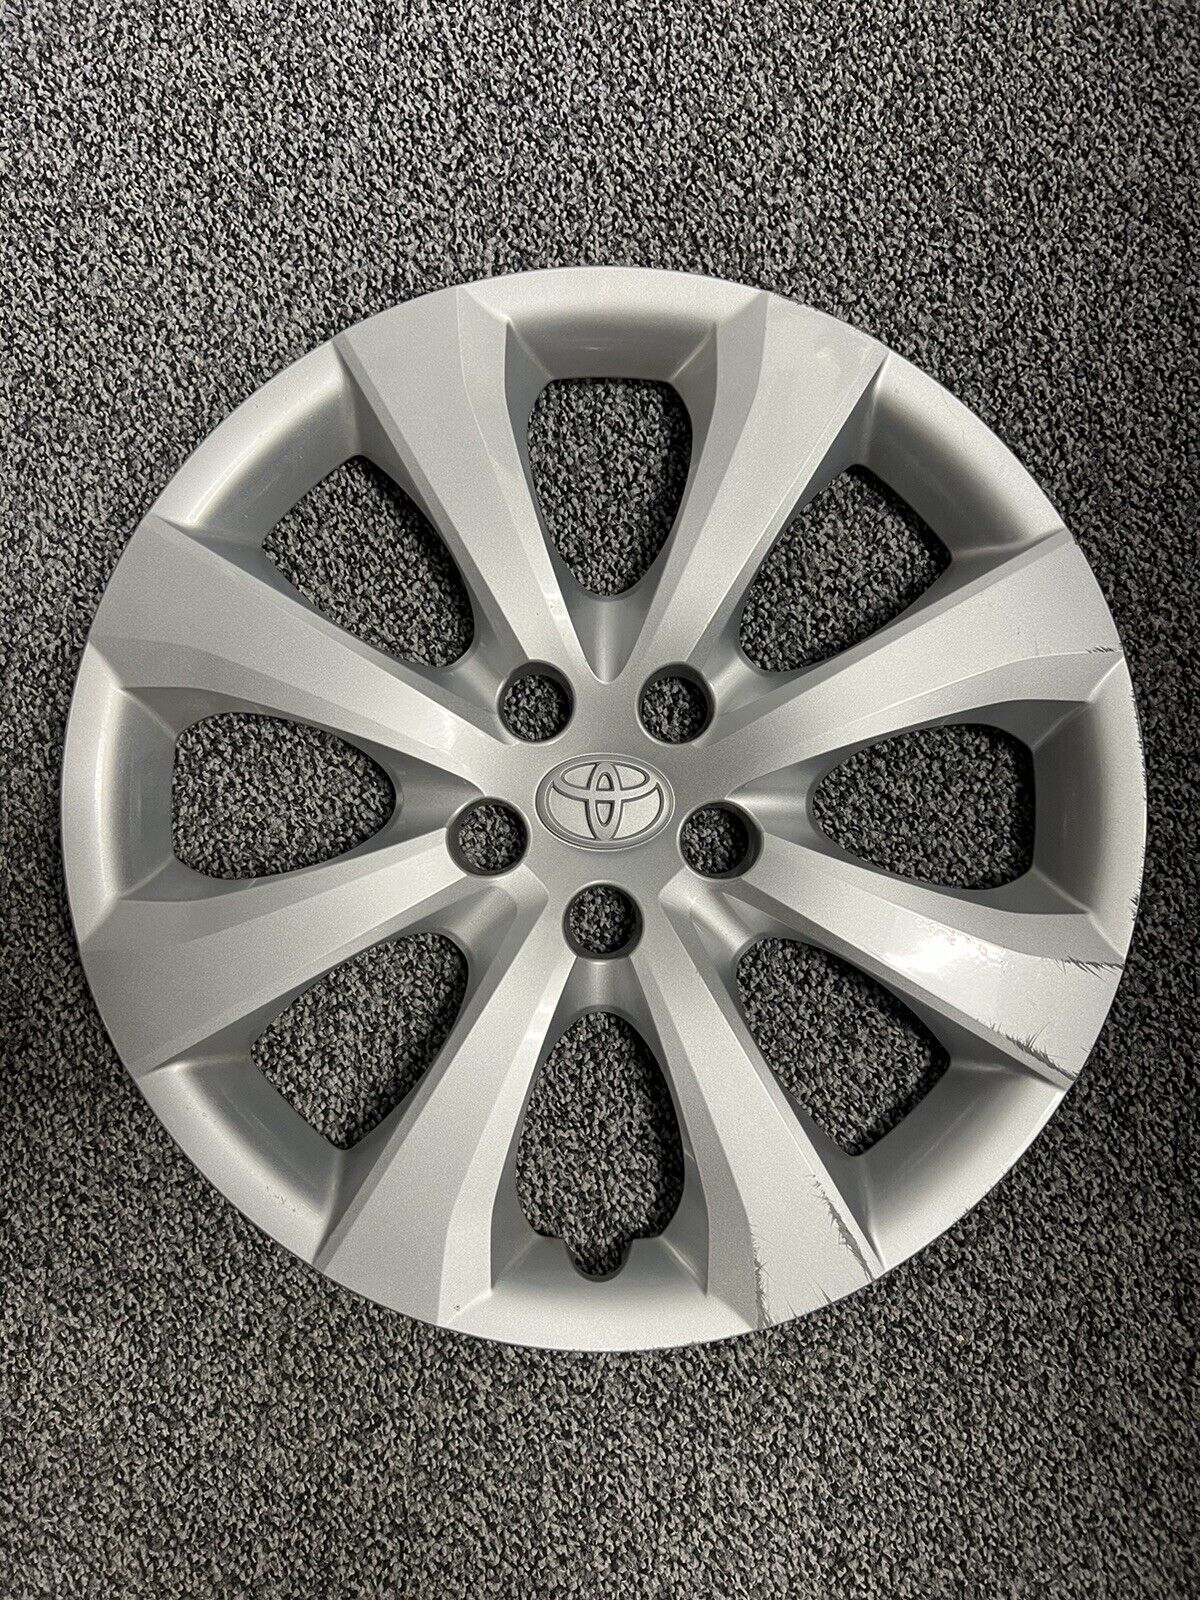 ONE HUBCAP FITS 2020-2022 Toyota Corolla OEM Factory 16” Wheel Cover 42602-12850